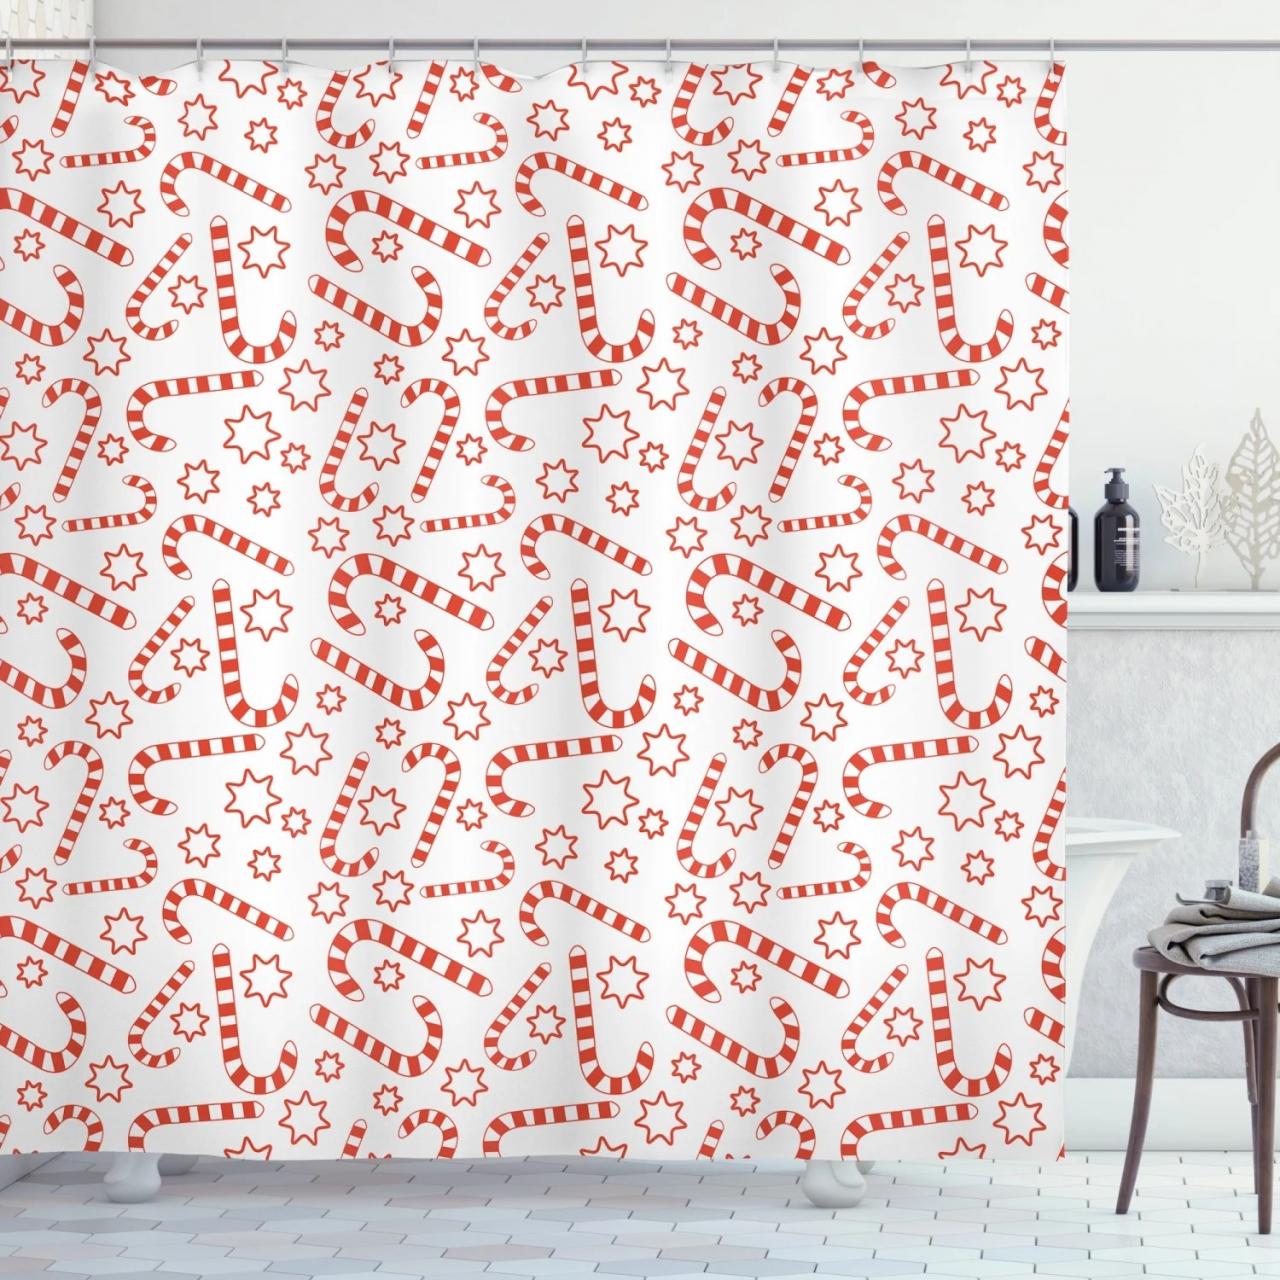 Candy Cane Shower Curtain, Illustration of Xmas Themed Figures